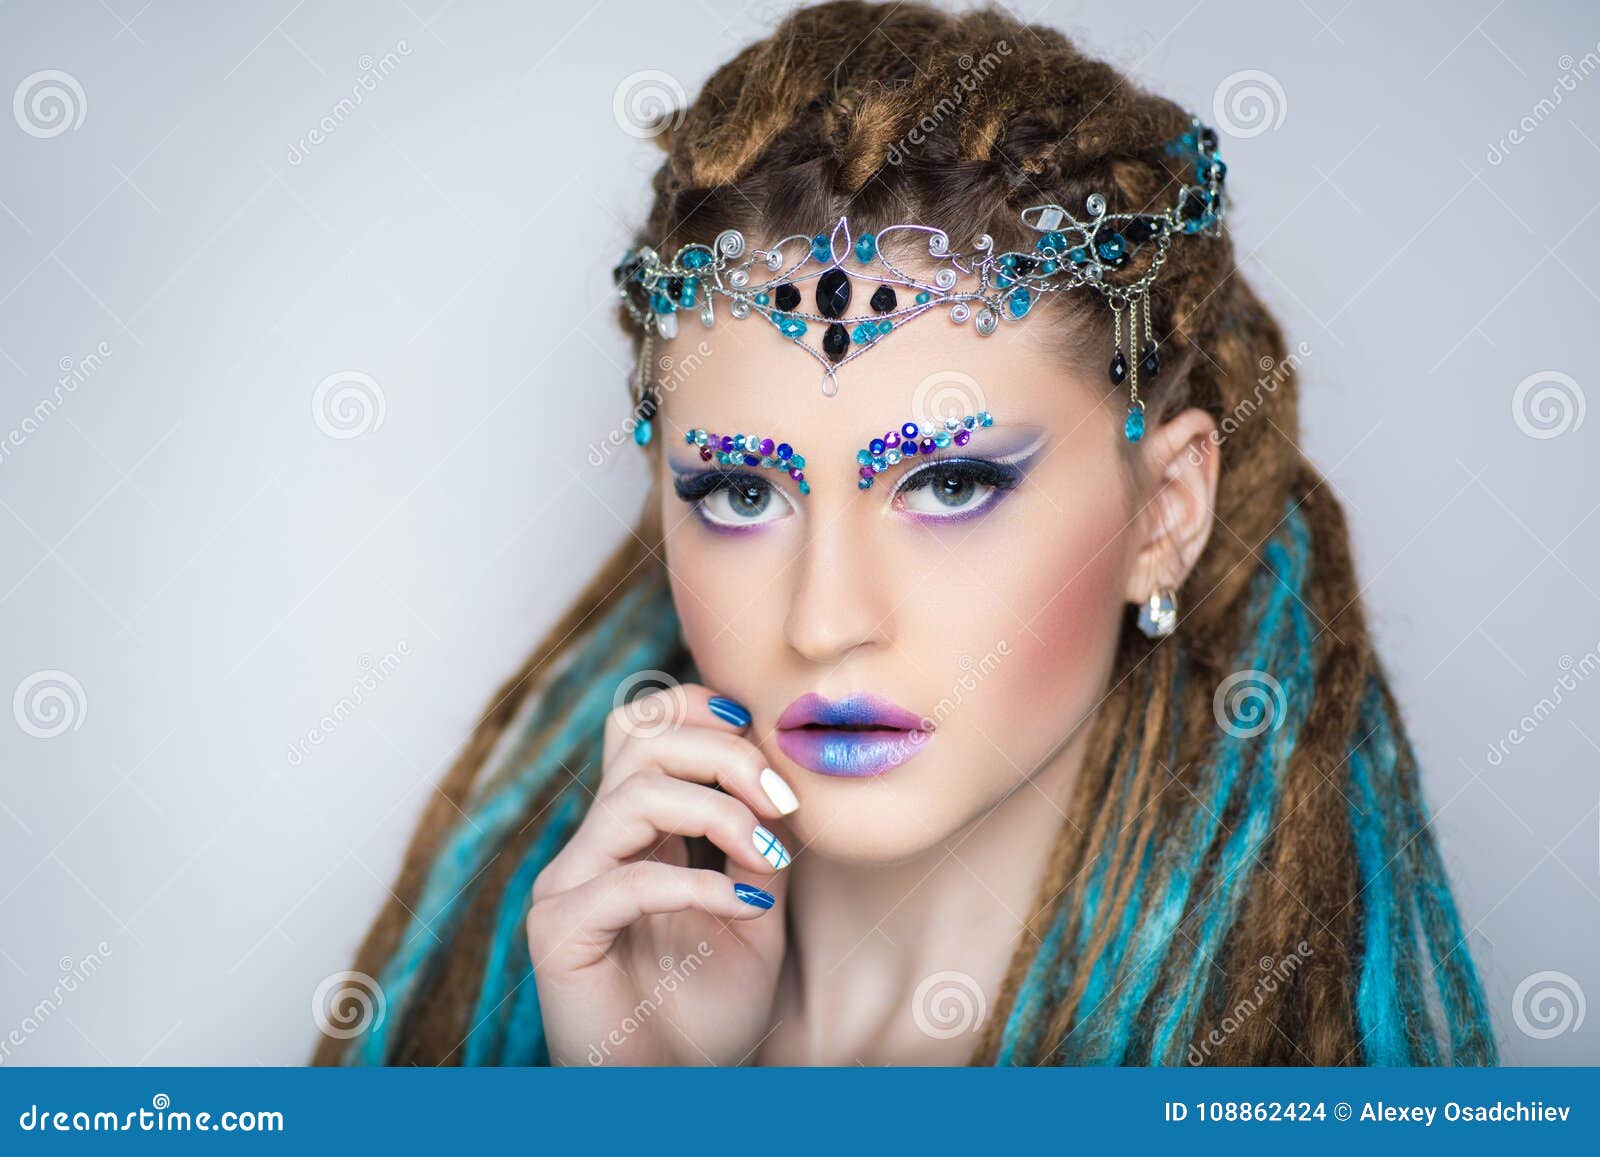 Woman With Dreads Stock Photo Image Of Freak Gipsy 108862424